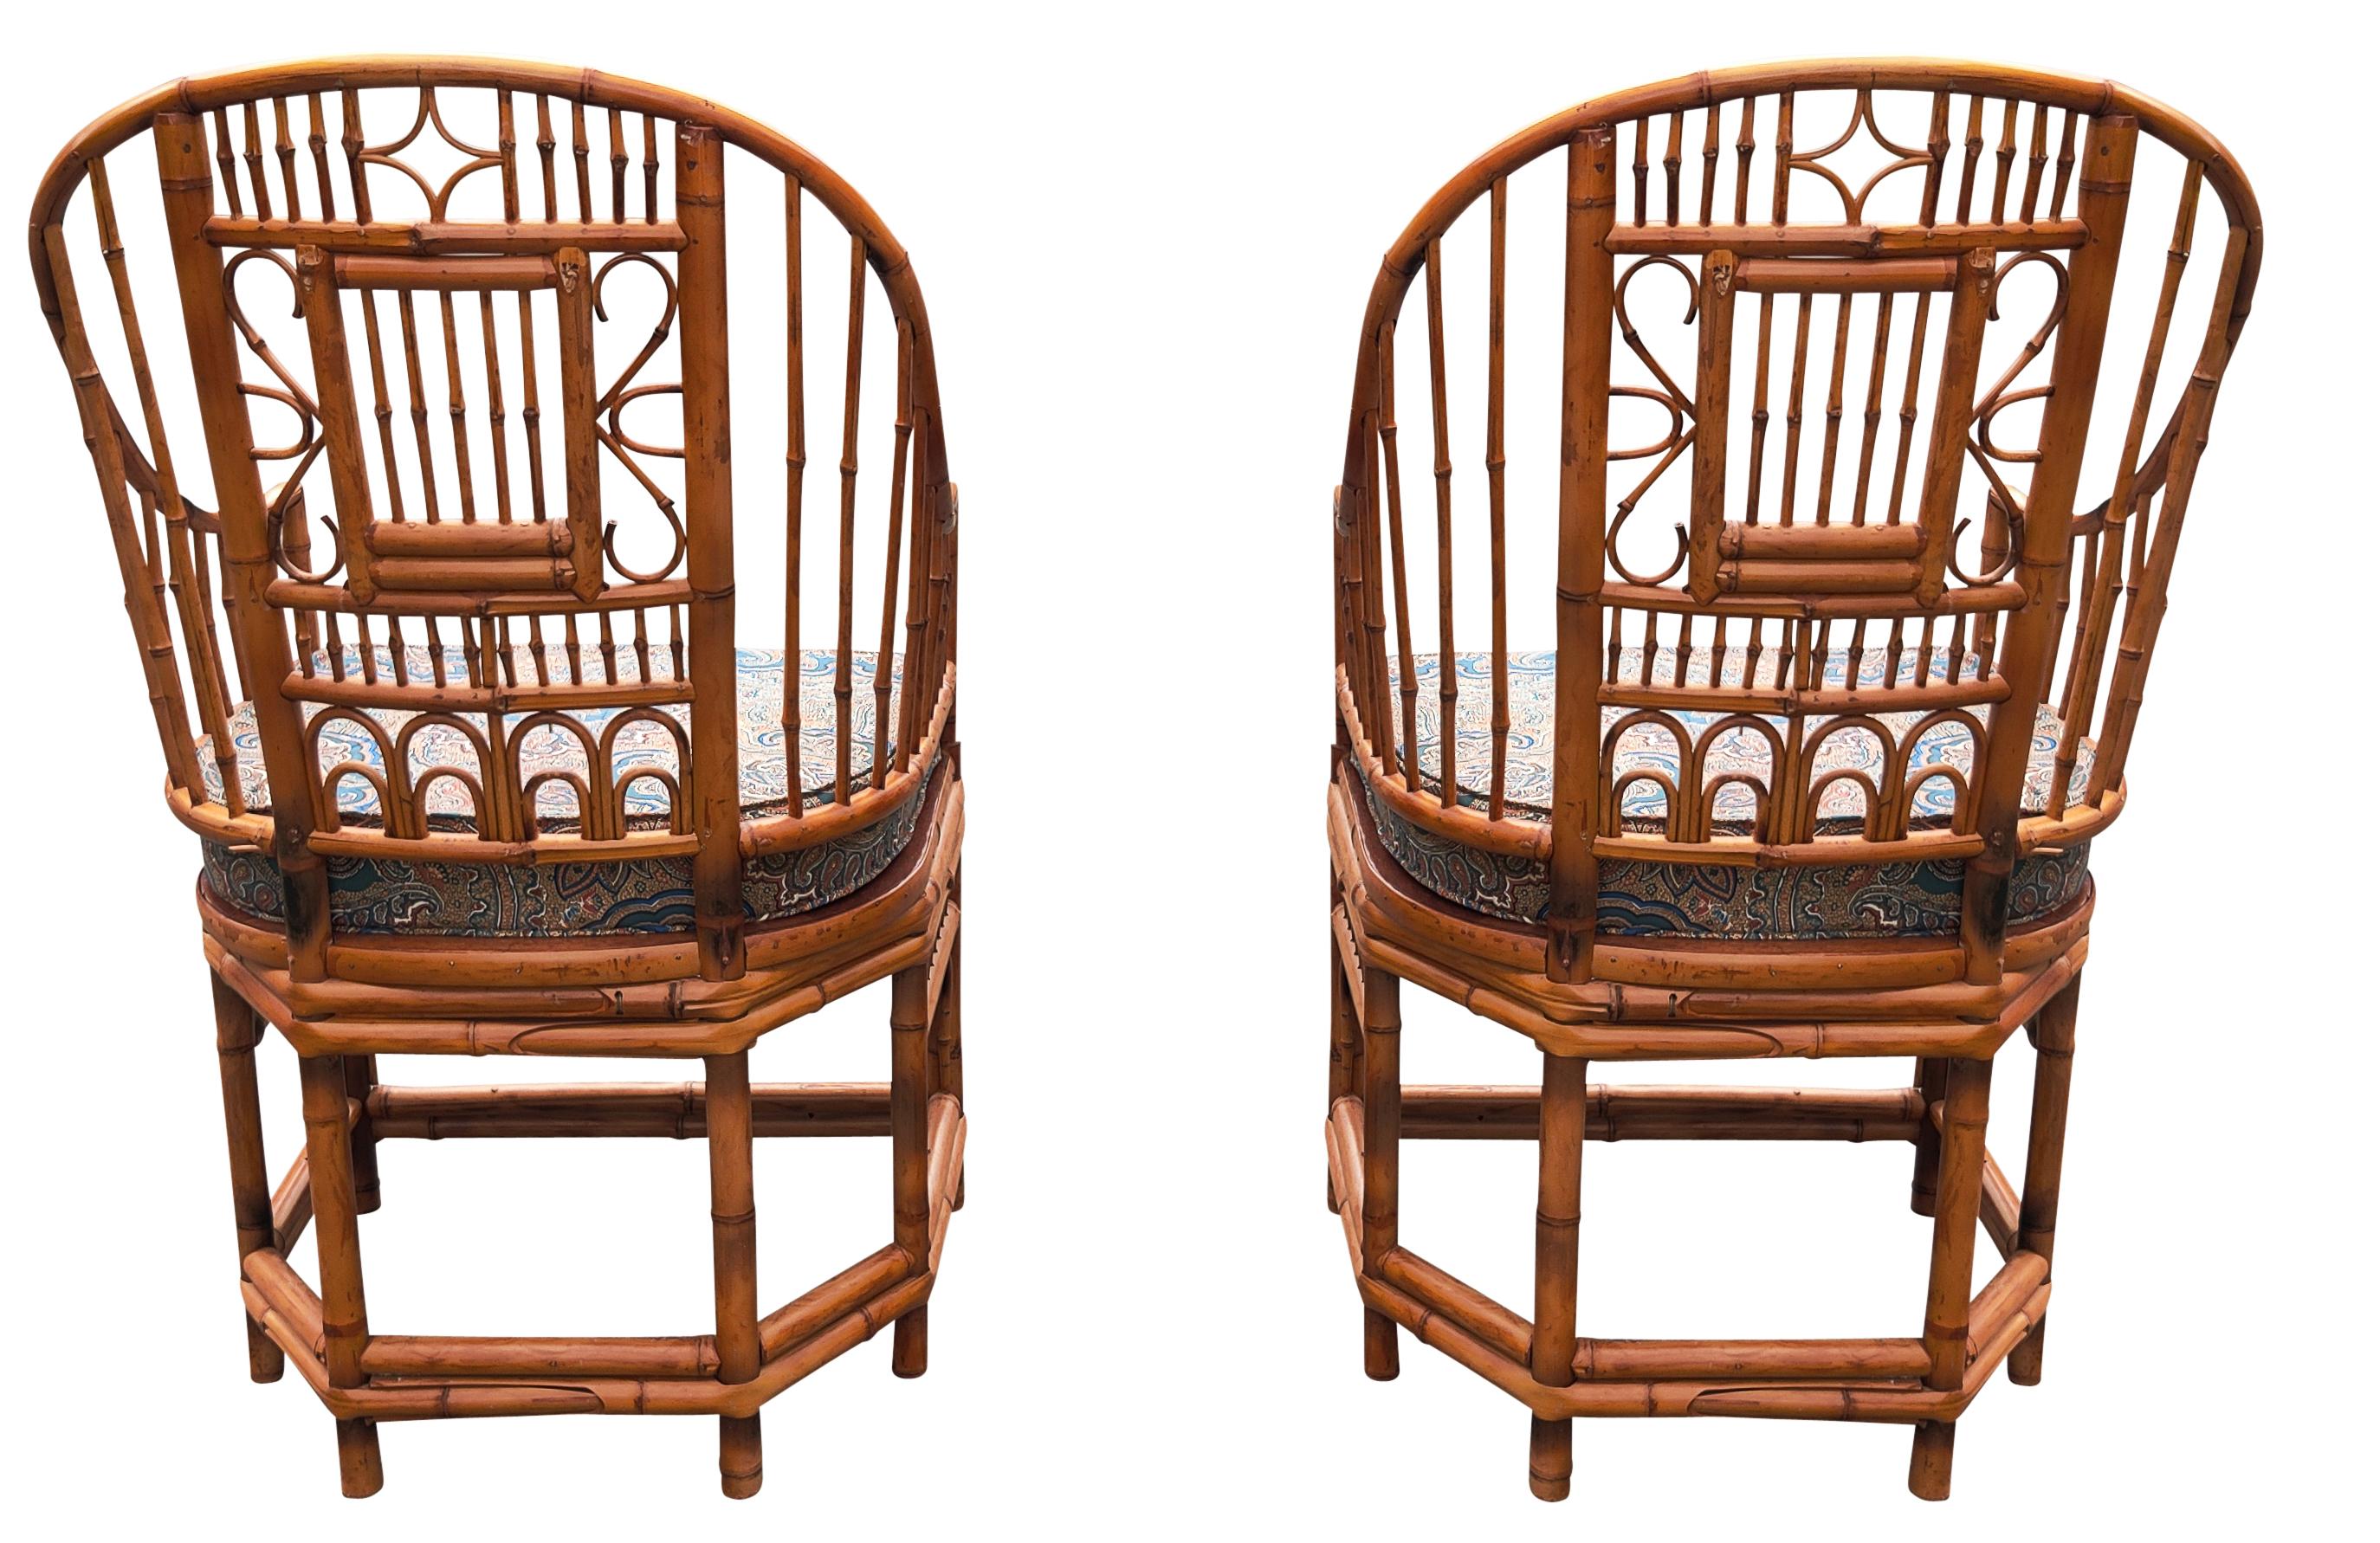 Late 20th Century Chinoiserie English Bamboo Cane Pair Armchairs, Manner of Brighton Pavilion